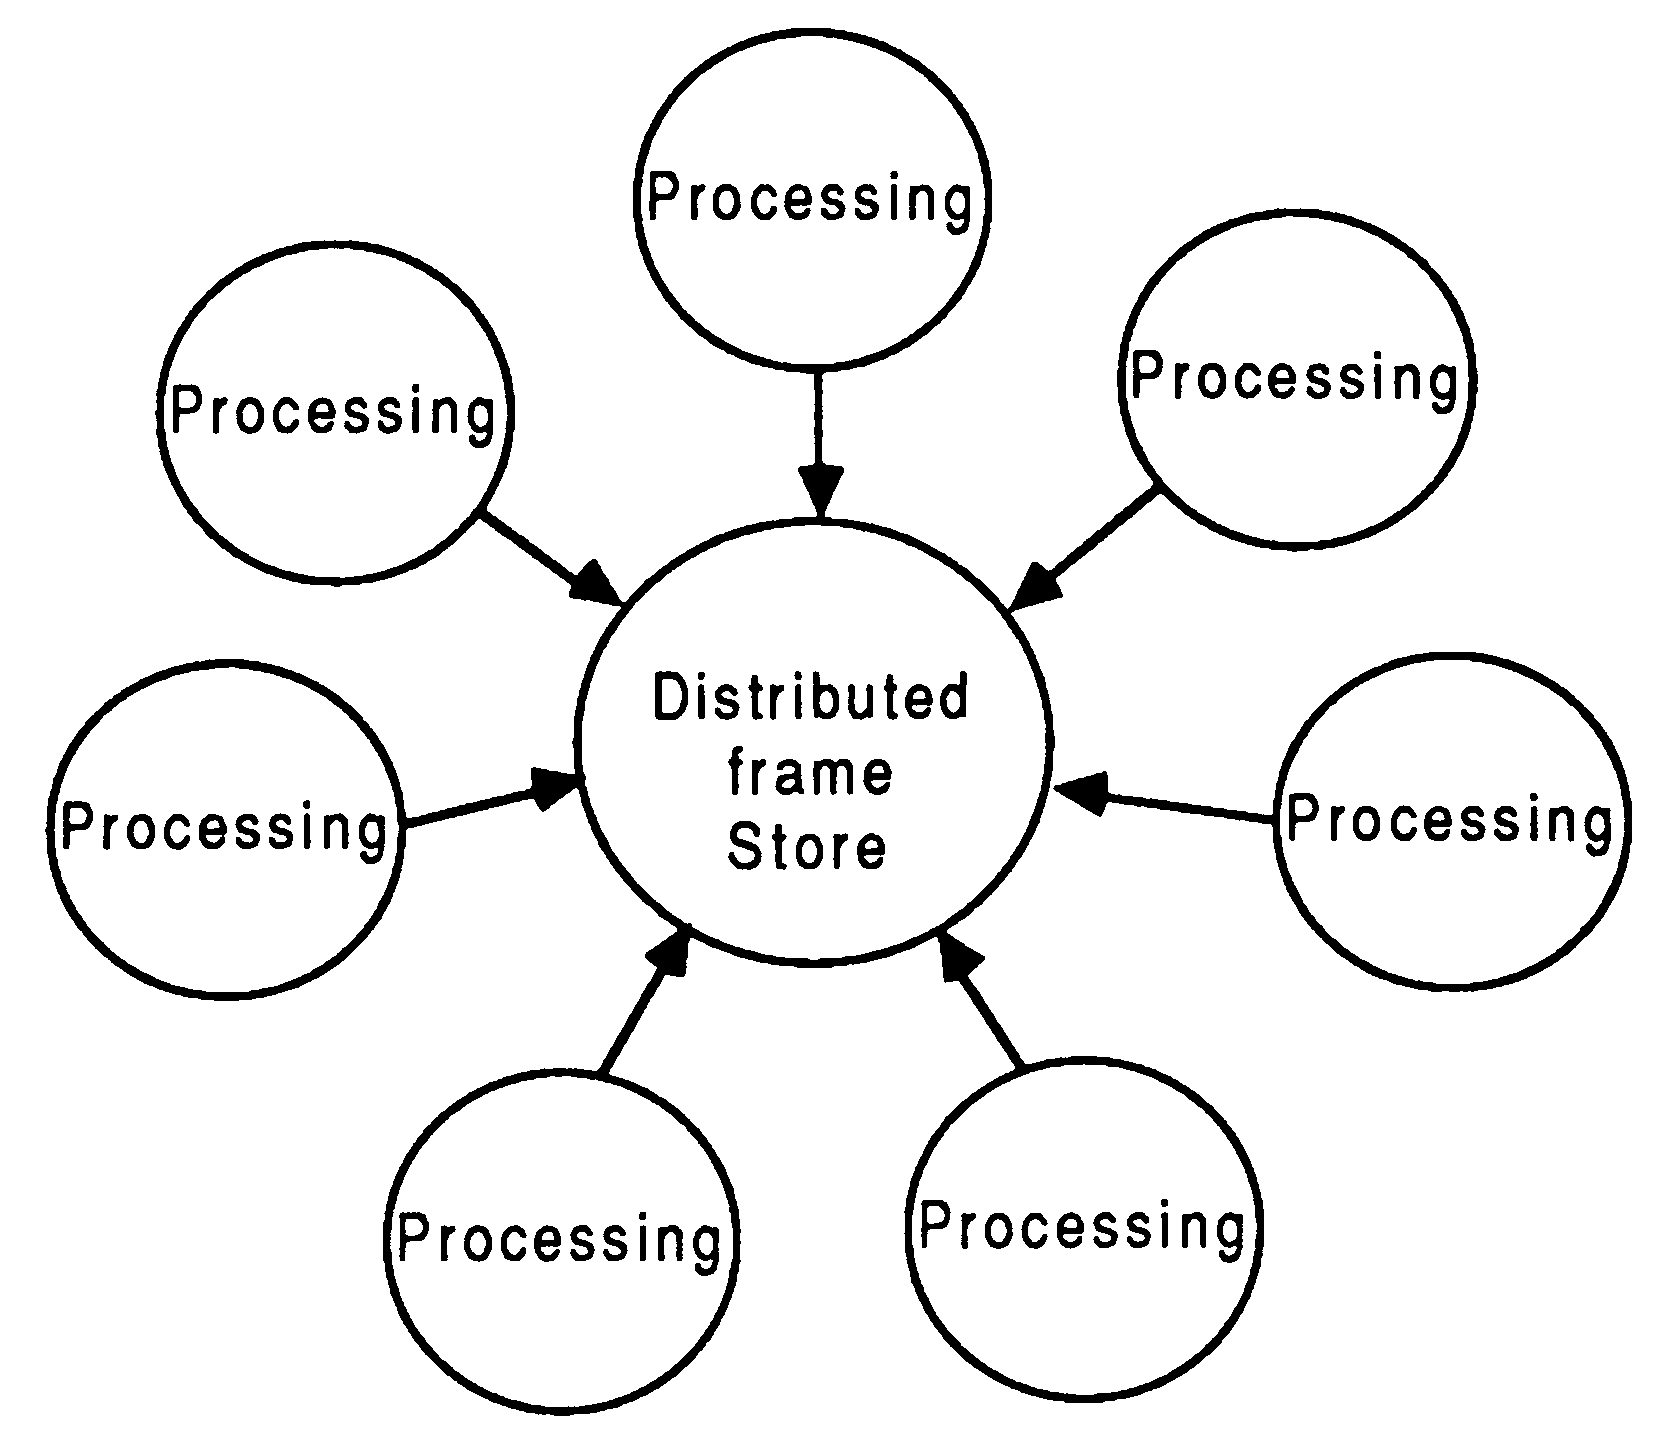 Conceptualisation of the
distributed frame Store